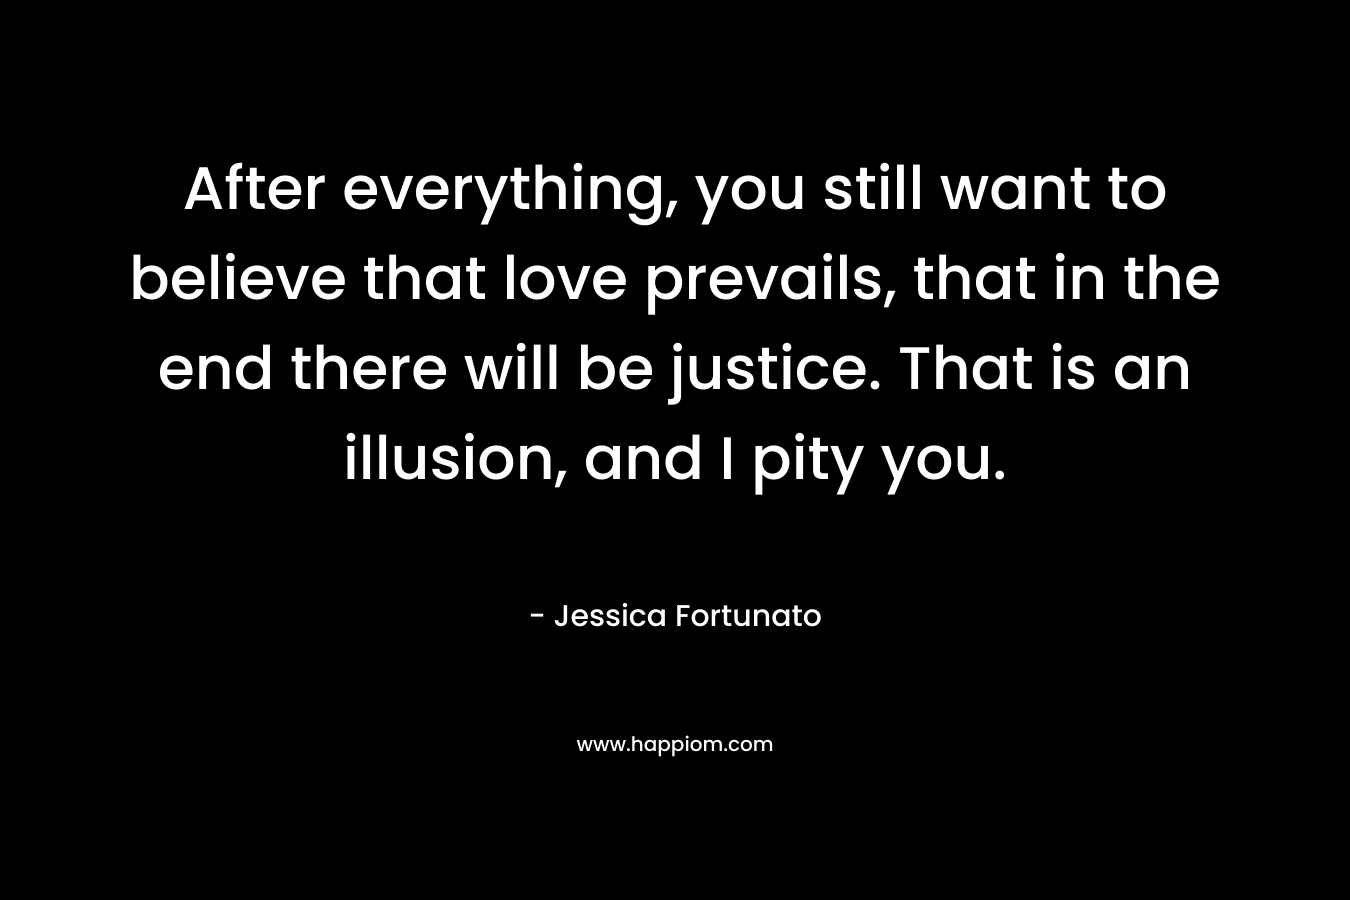 After everything, you still want to believe that love prevails, that in the end there will be justice. That is an illusion, and I pity you. – Jessica Fortunato